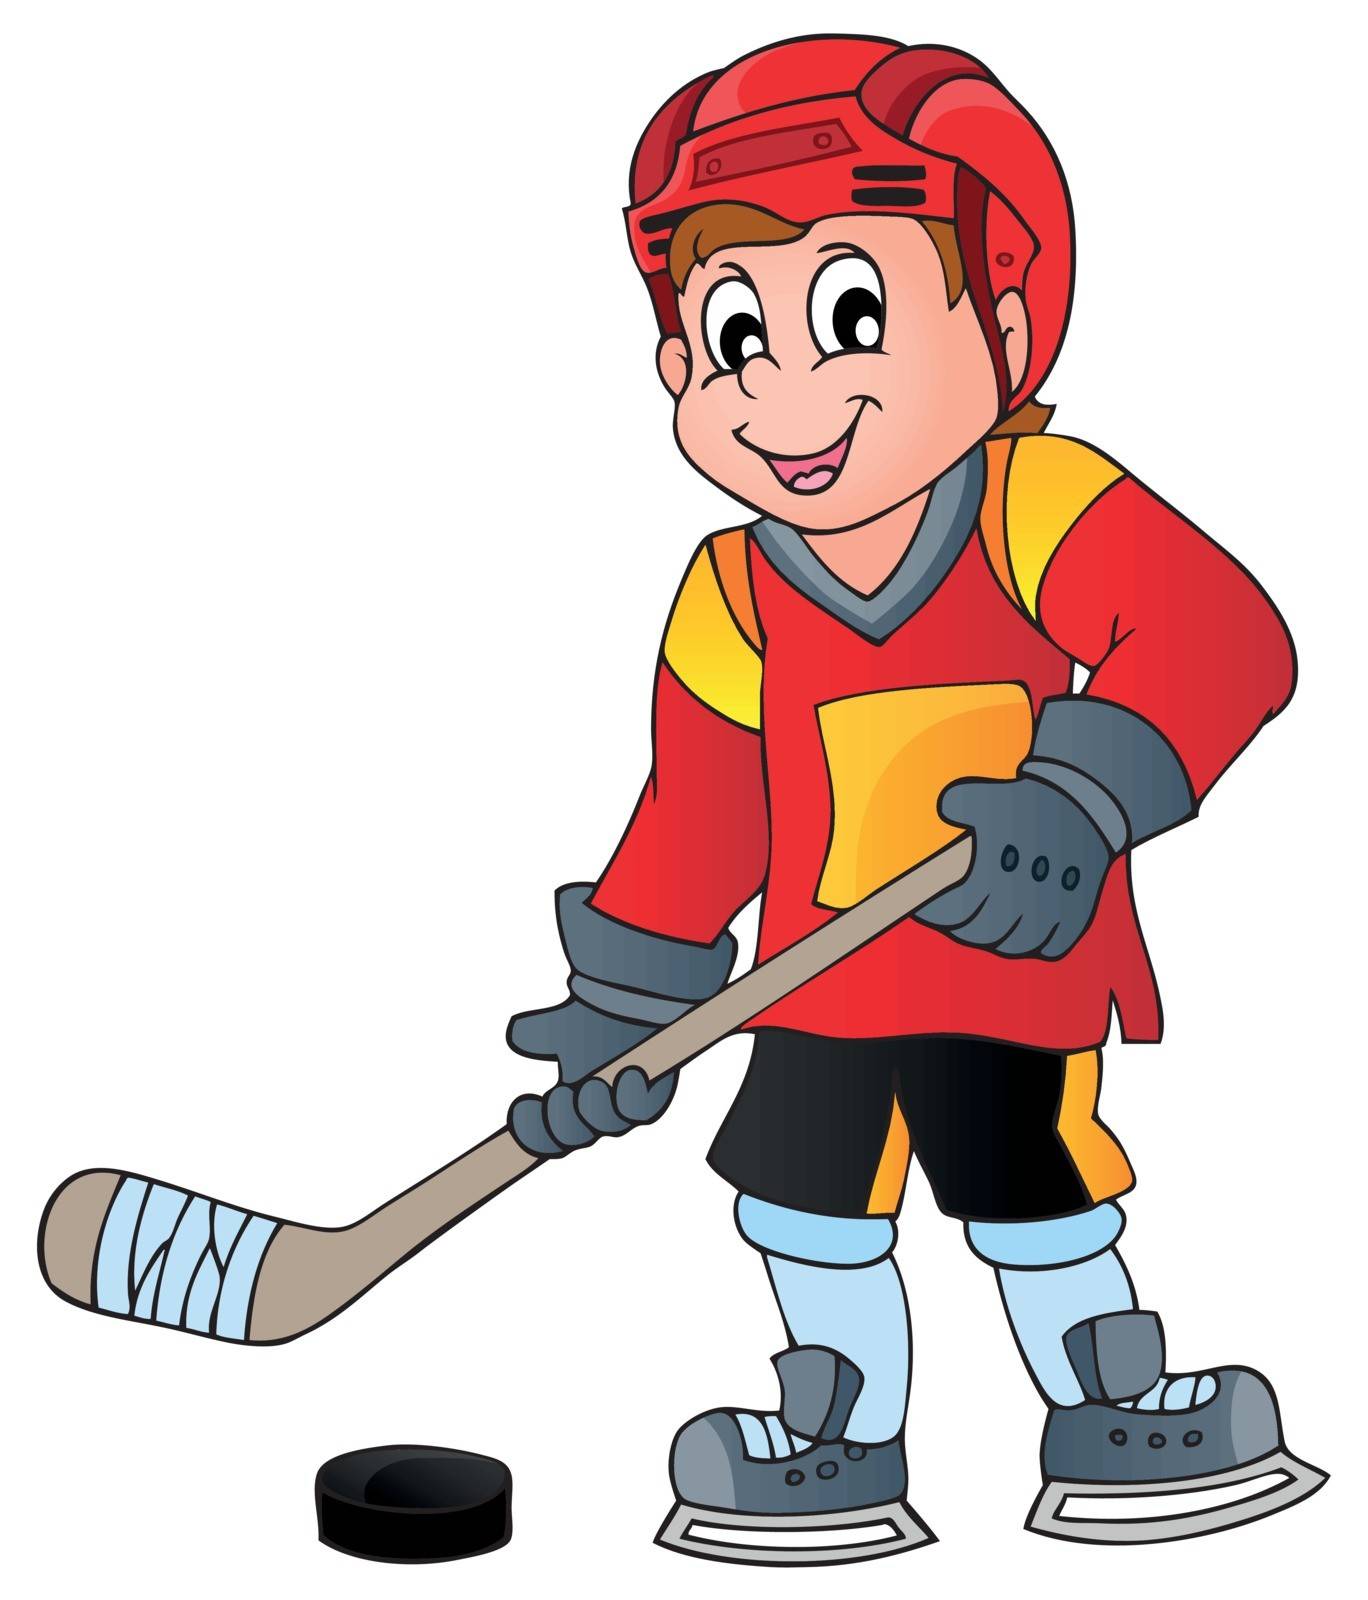 Hockey theme image 1 by clairev